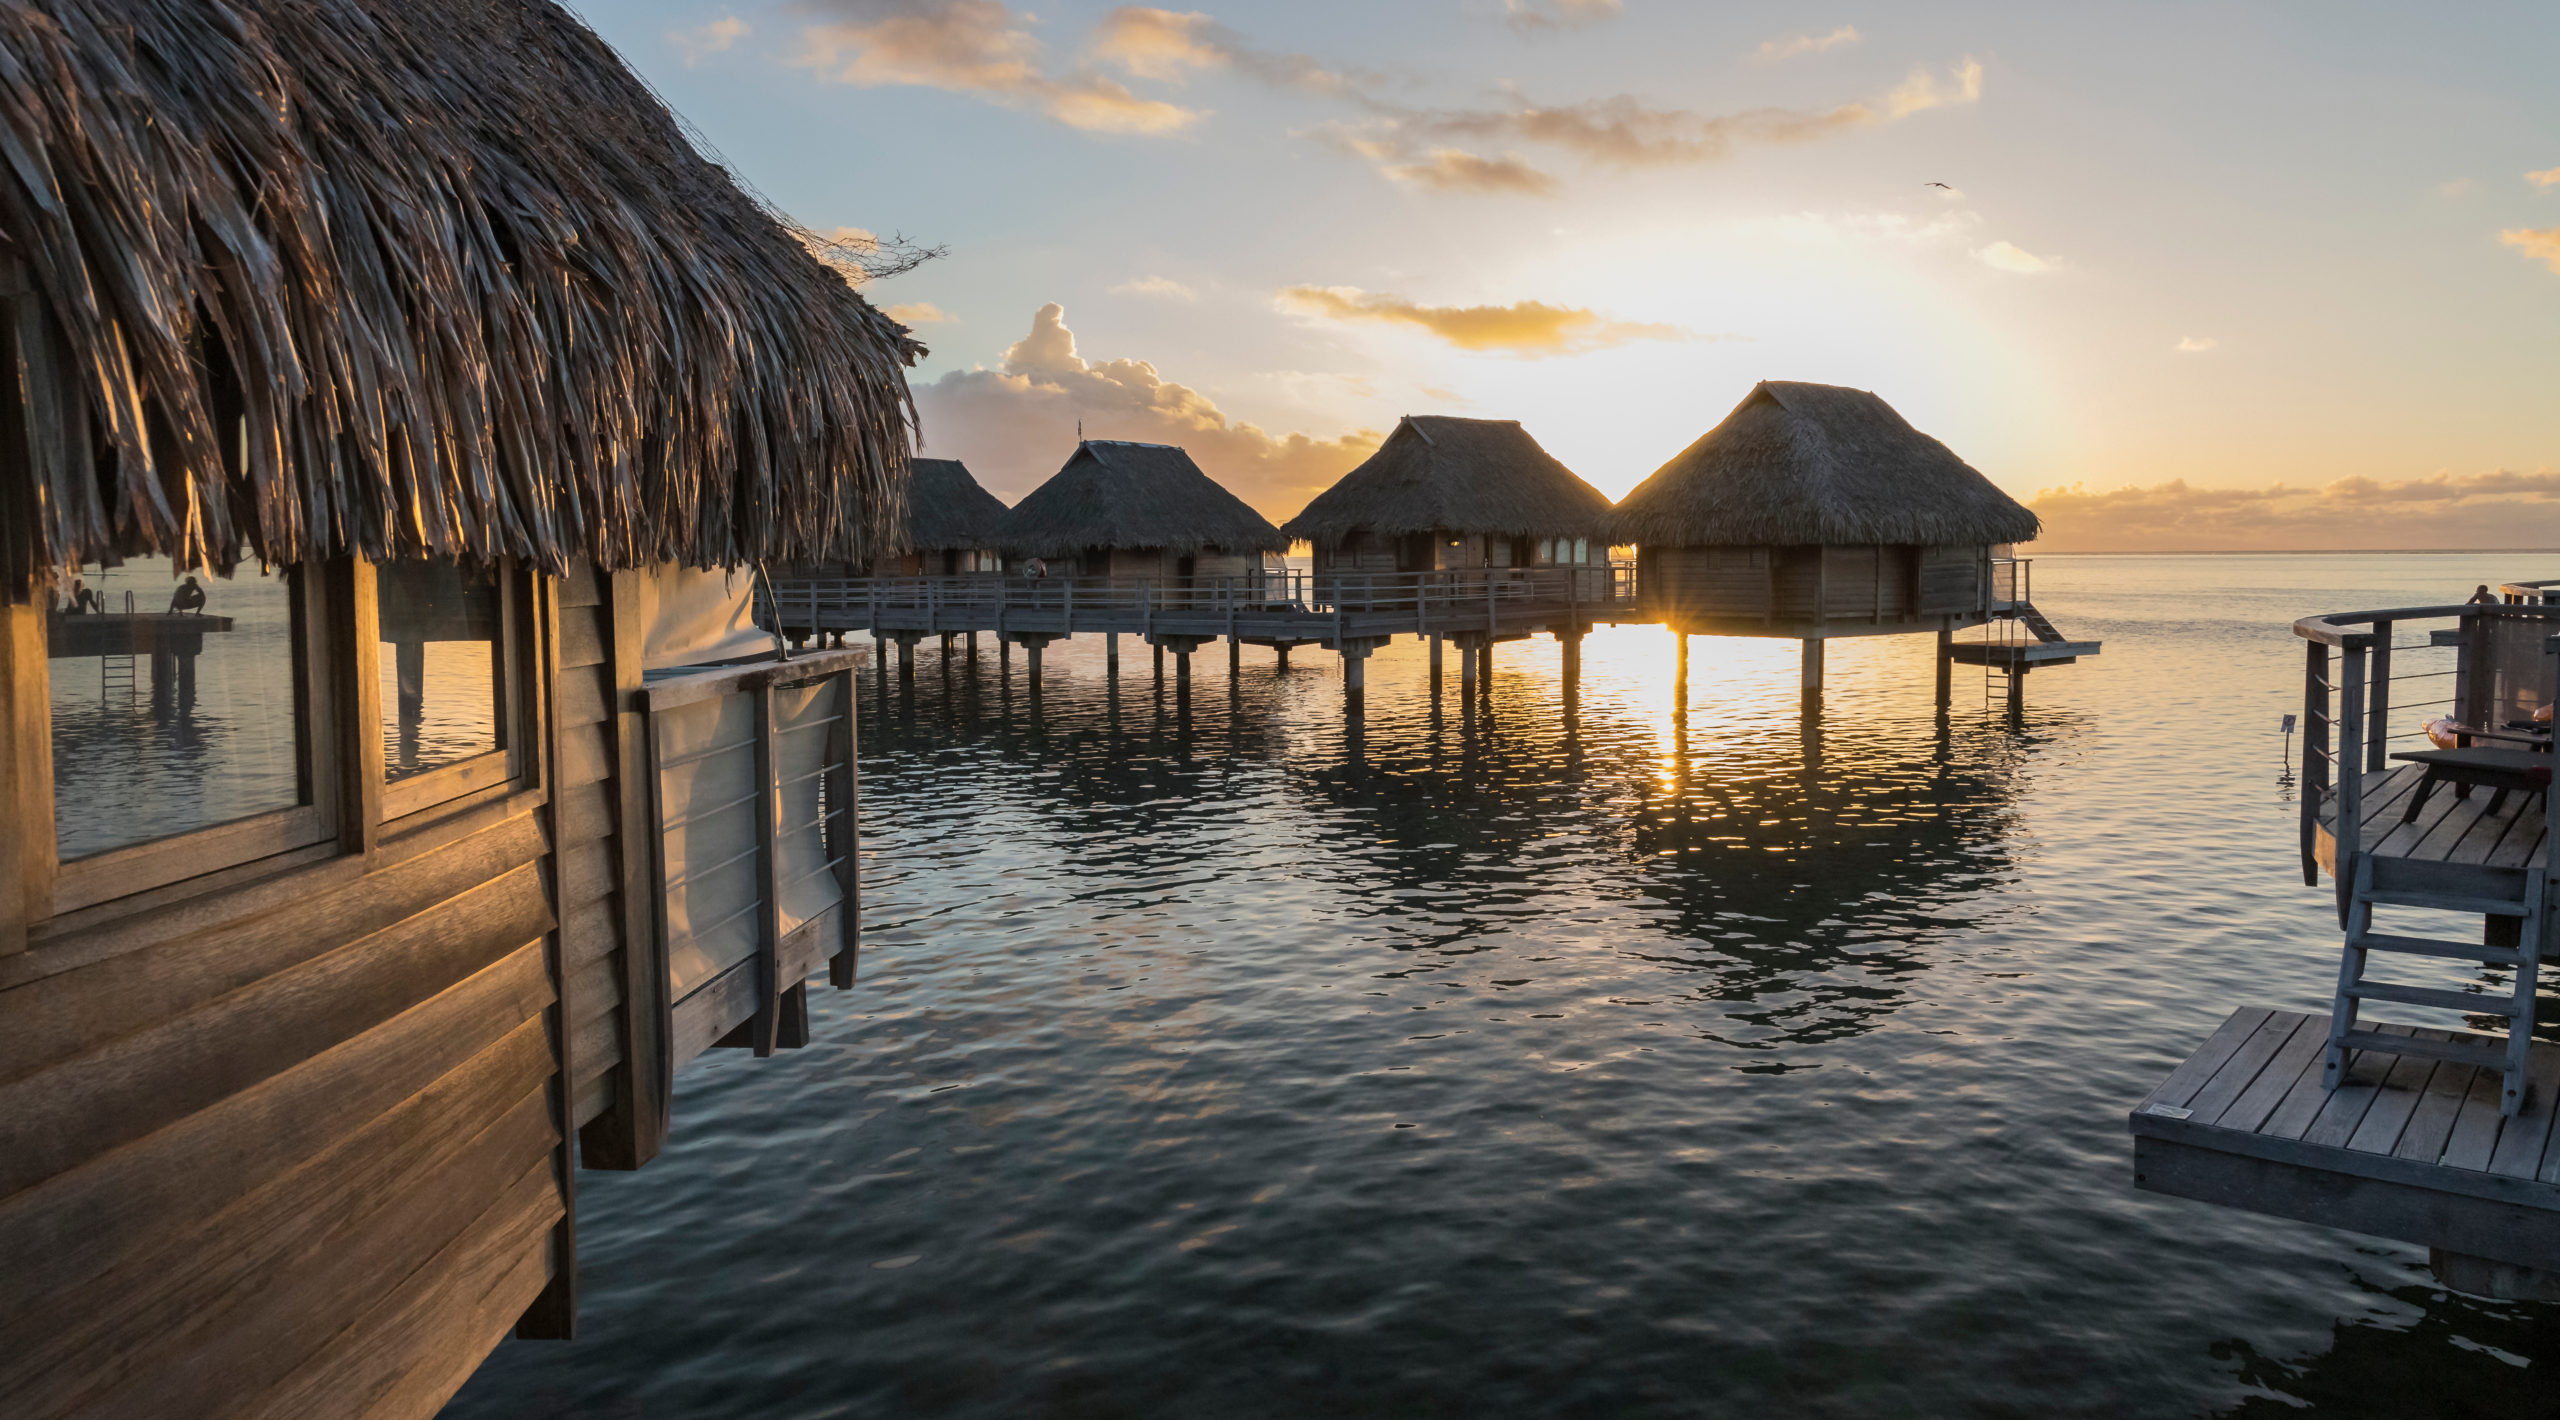 The 20 Most Amazing Overwater Bungalows in the World